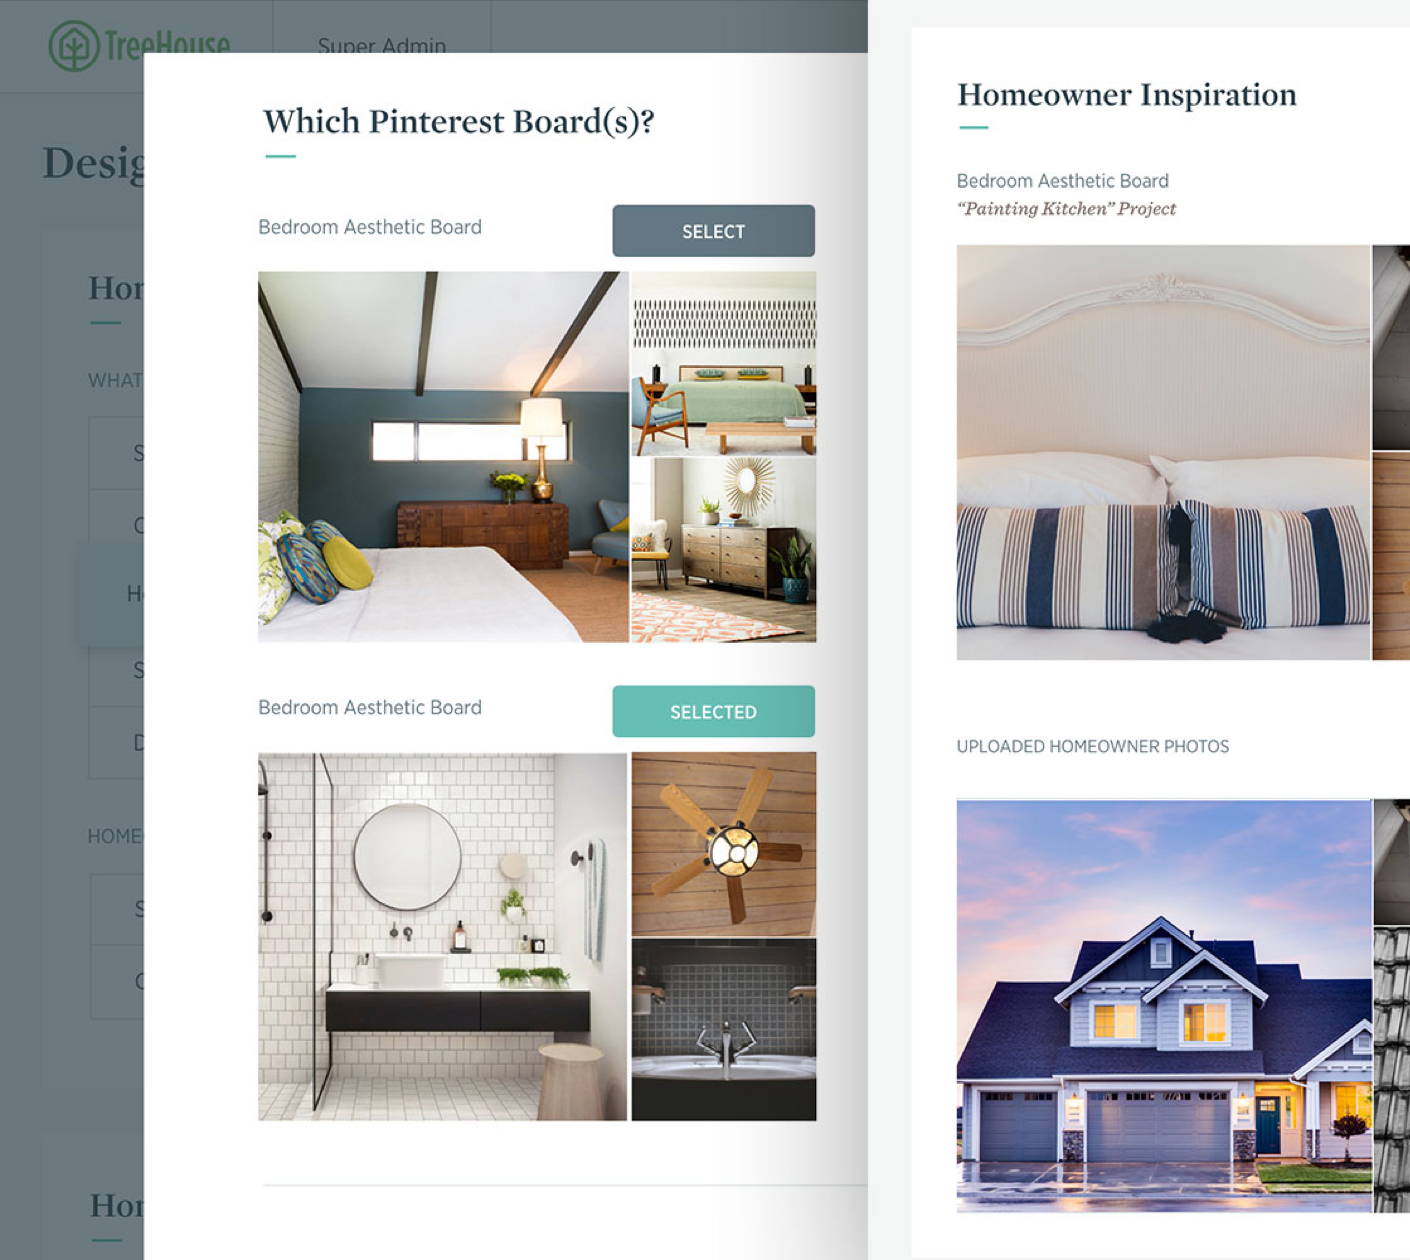 image of two overlapping Treehouse interface screens including a pinterest board upload component and a photo grid of uploaded homeowner photos